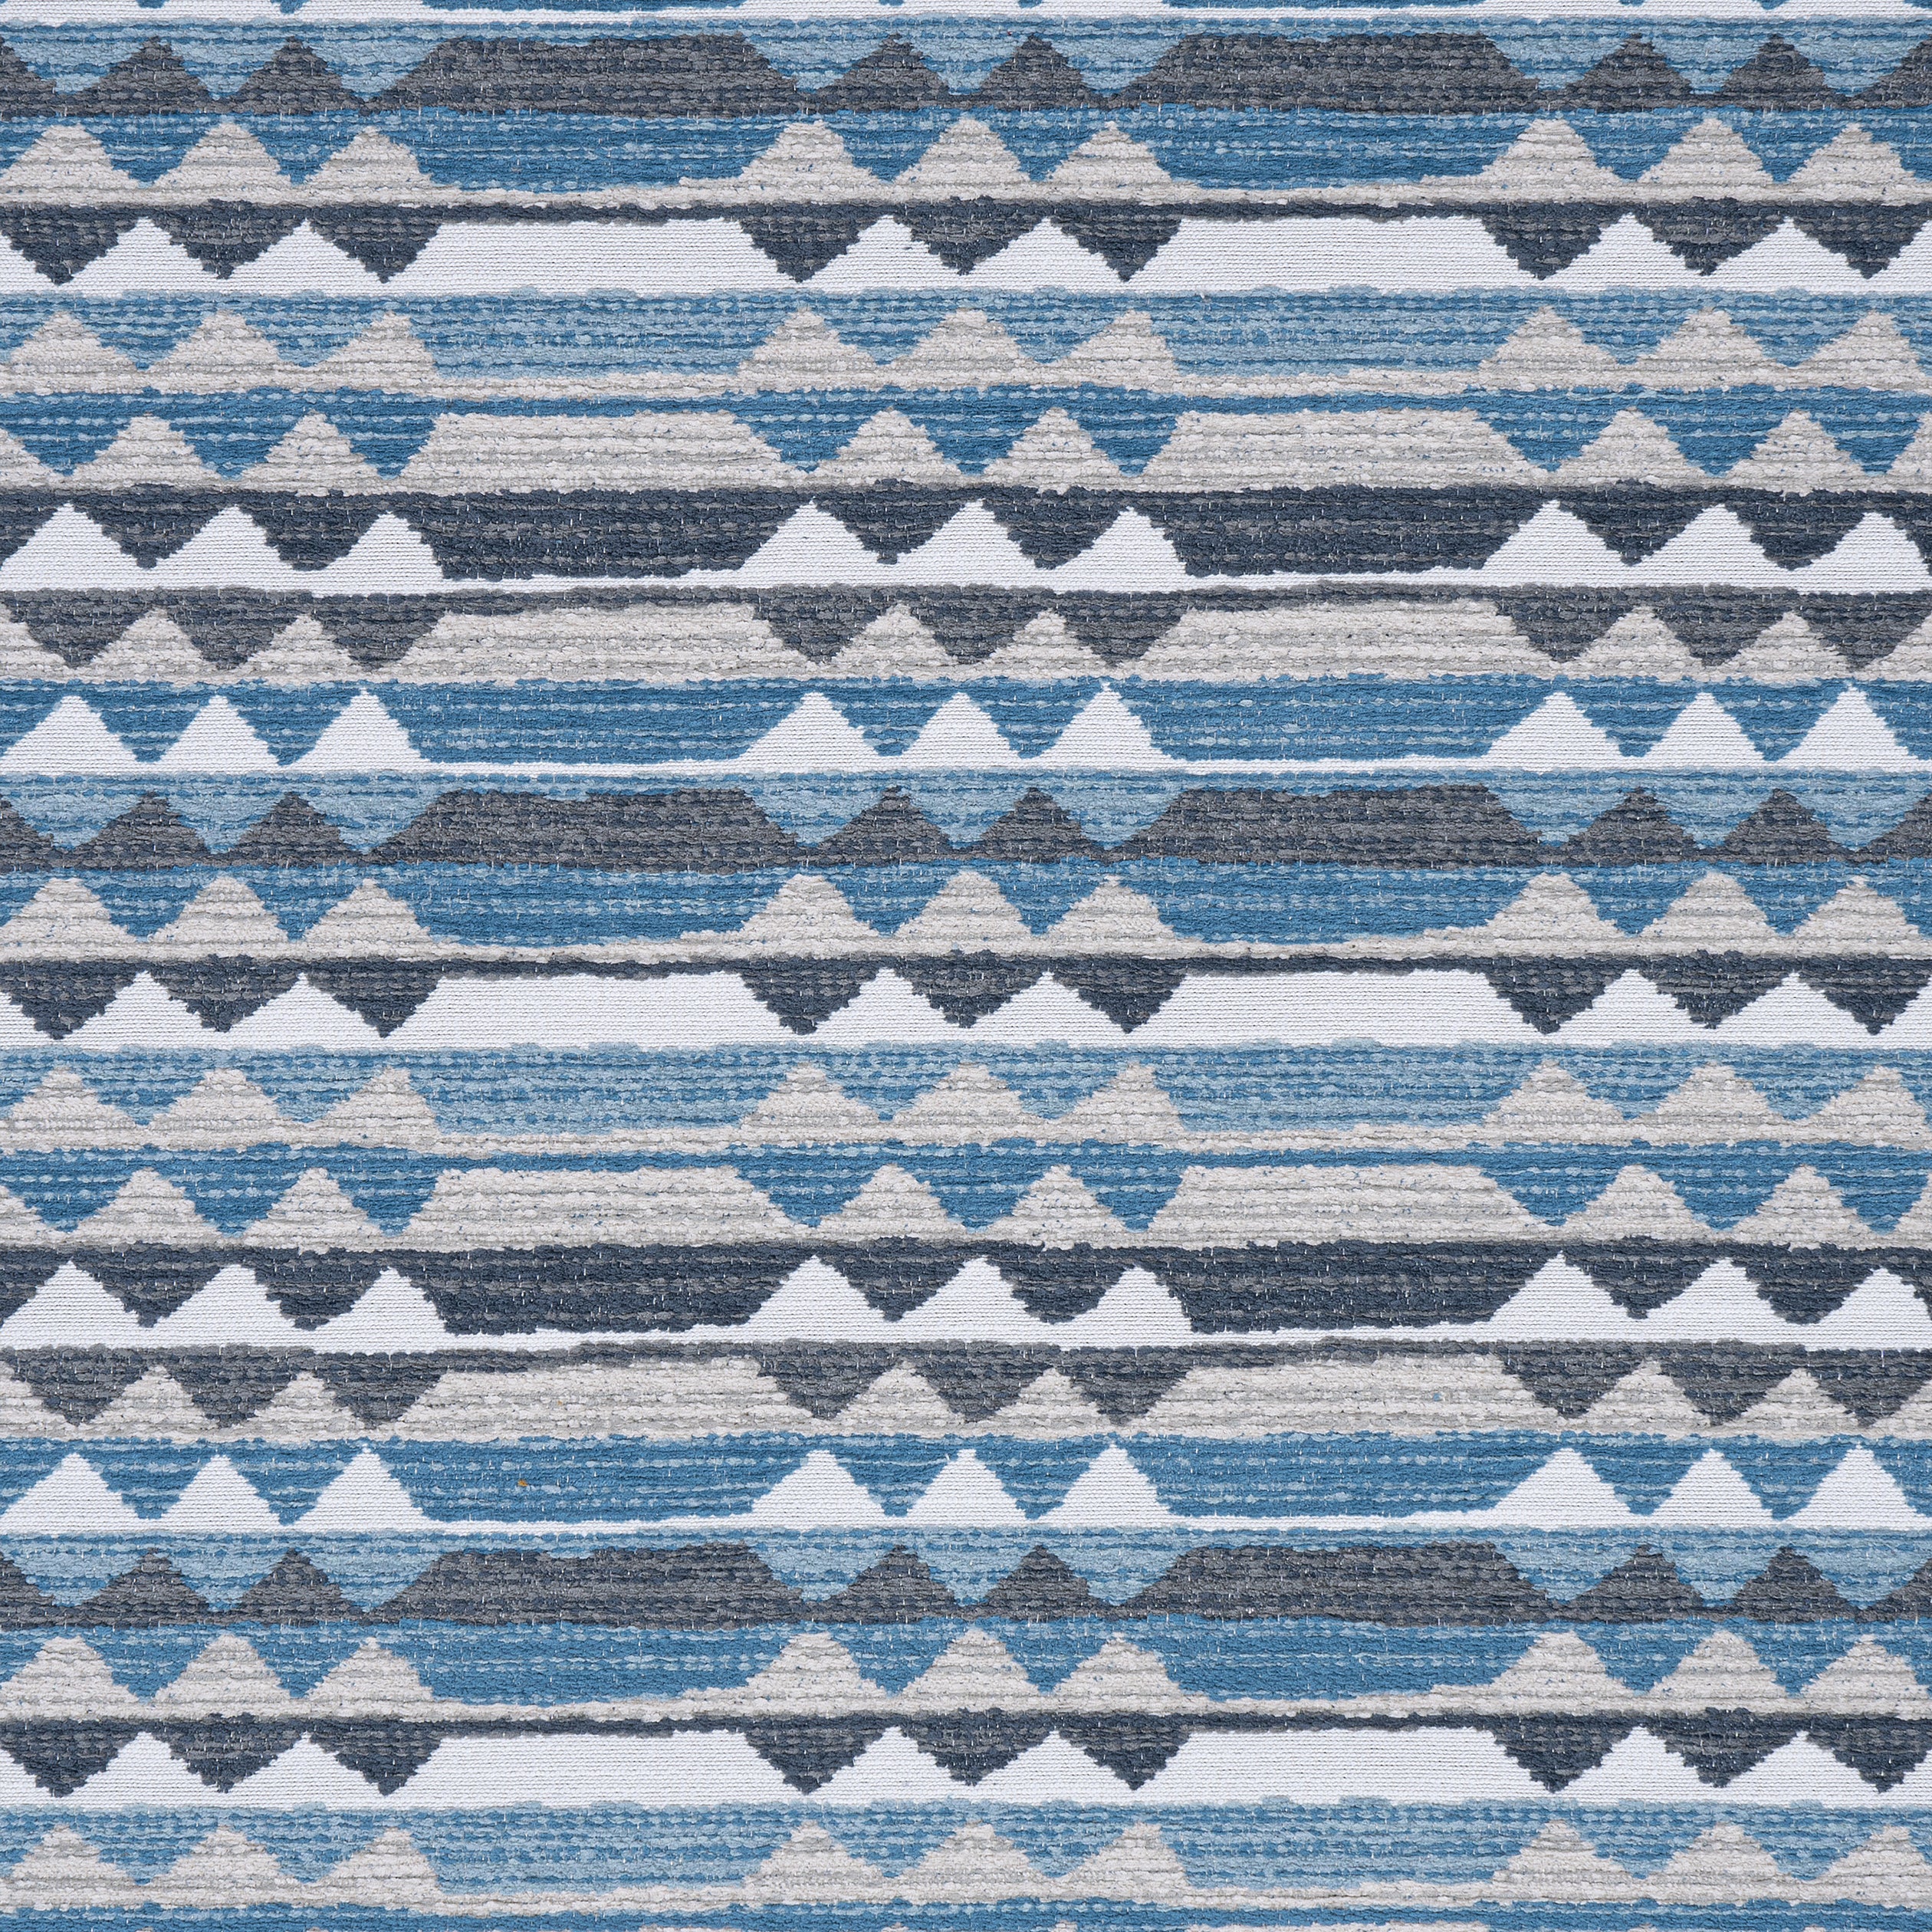 Saranac fabric in waterfall color - pattern number W78376 - by Thibaut in the  Sierra collection